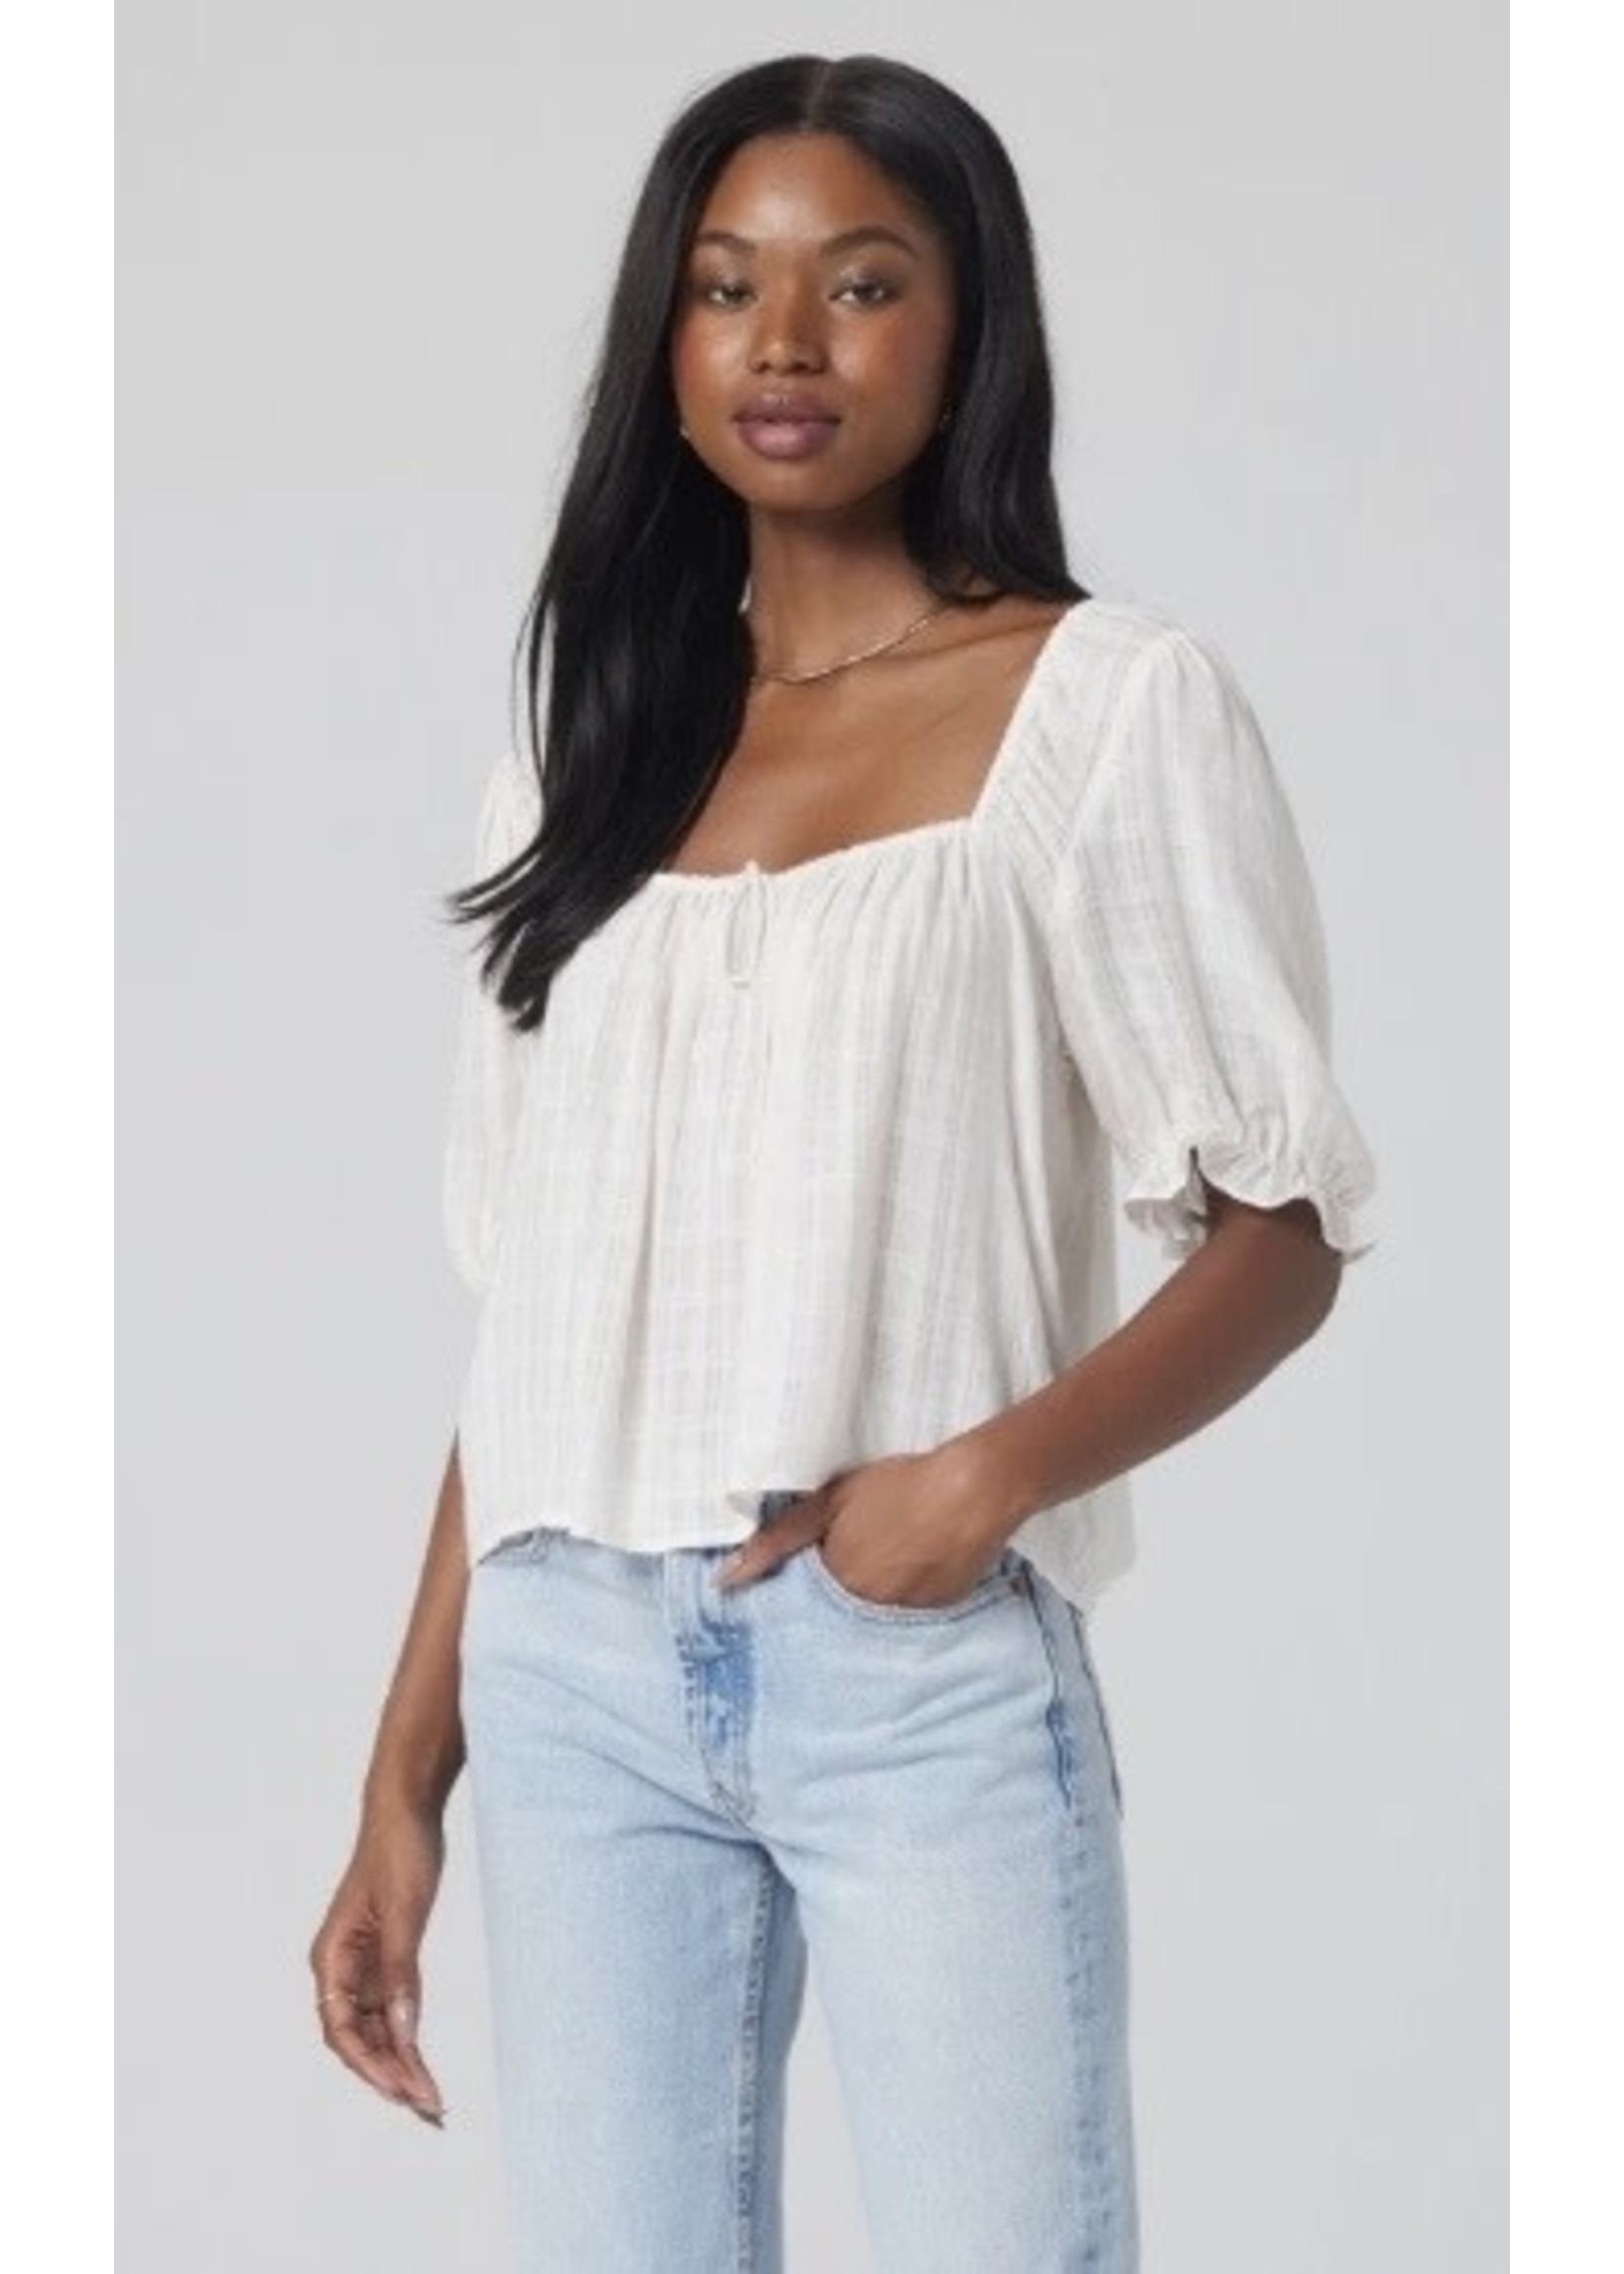 Saltwater Luxe Carly Top